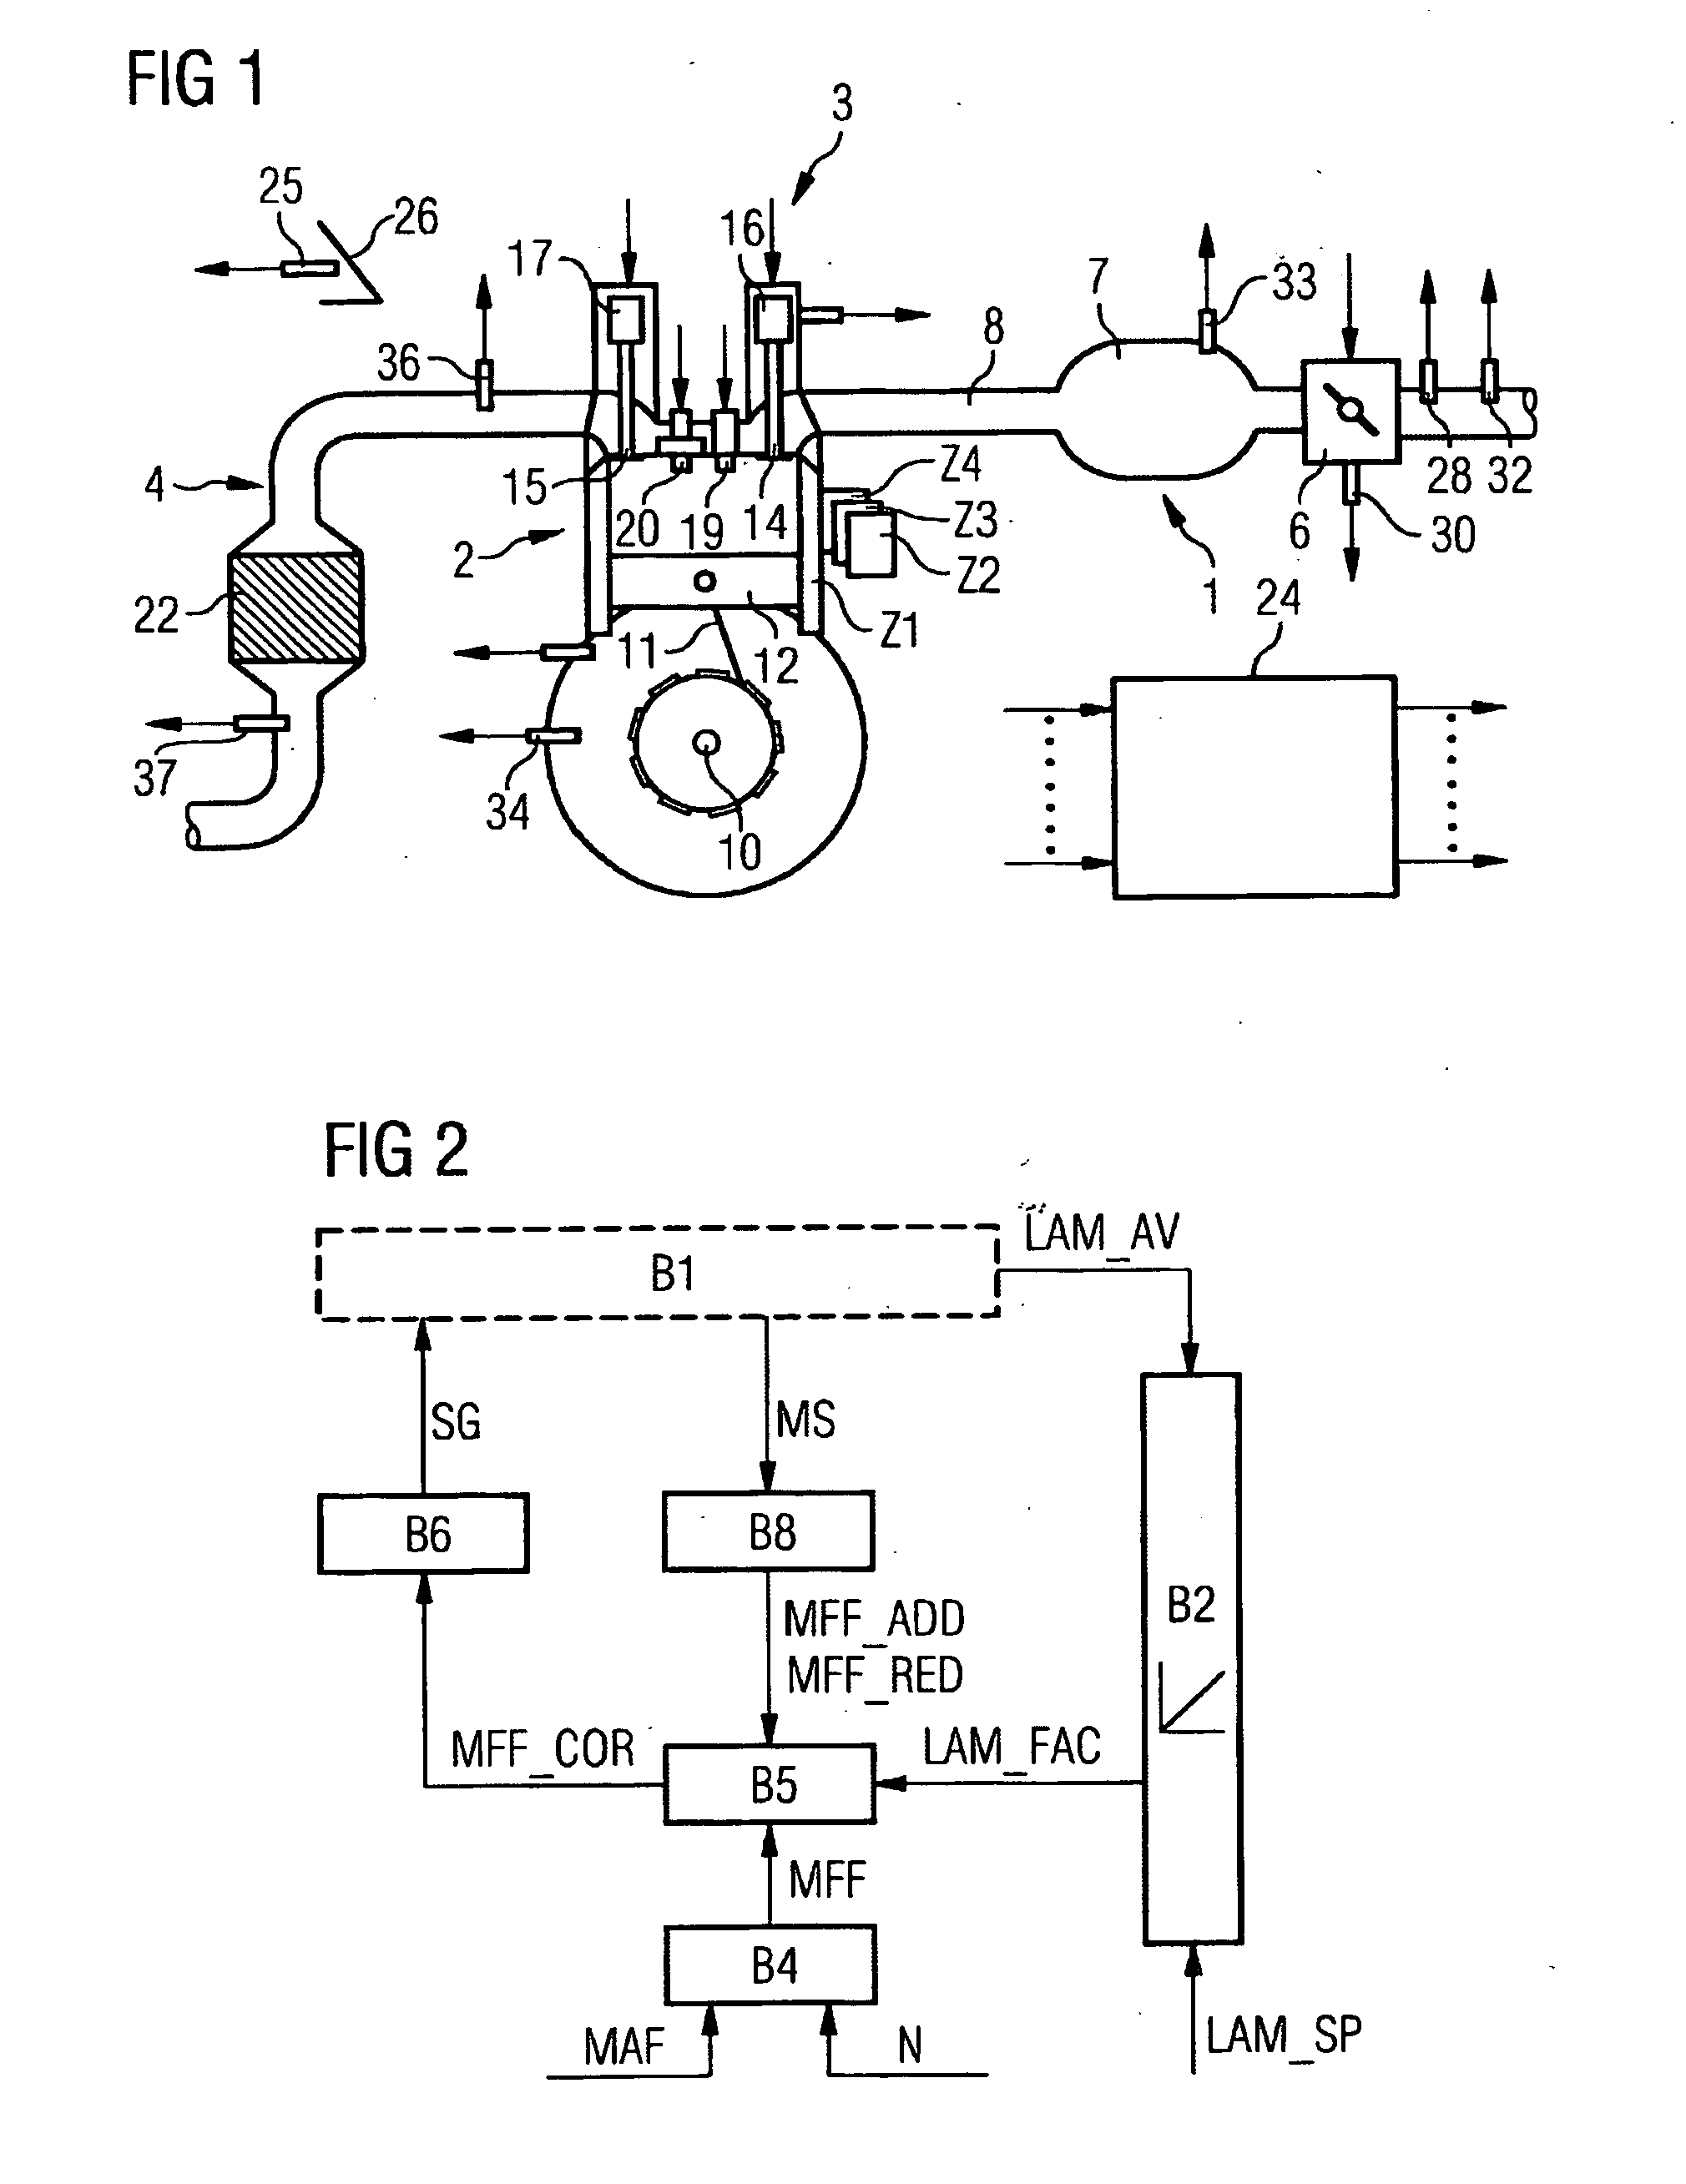 Method And Apparatus For Controlling An Internal Combustion Engine